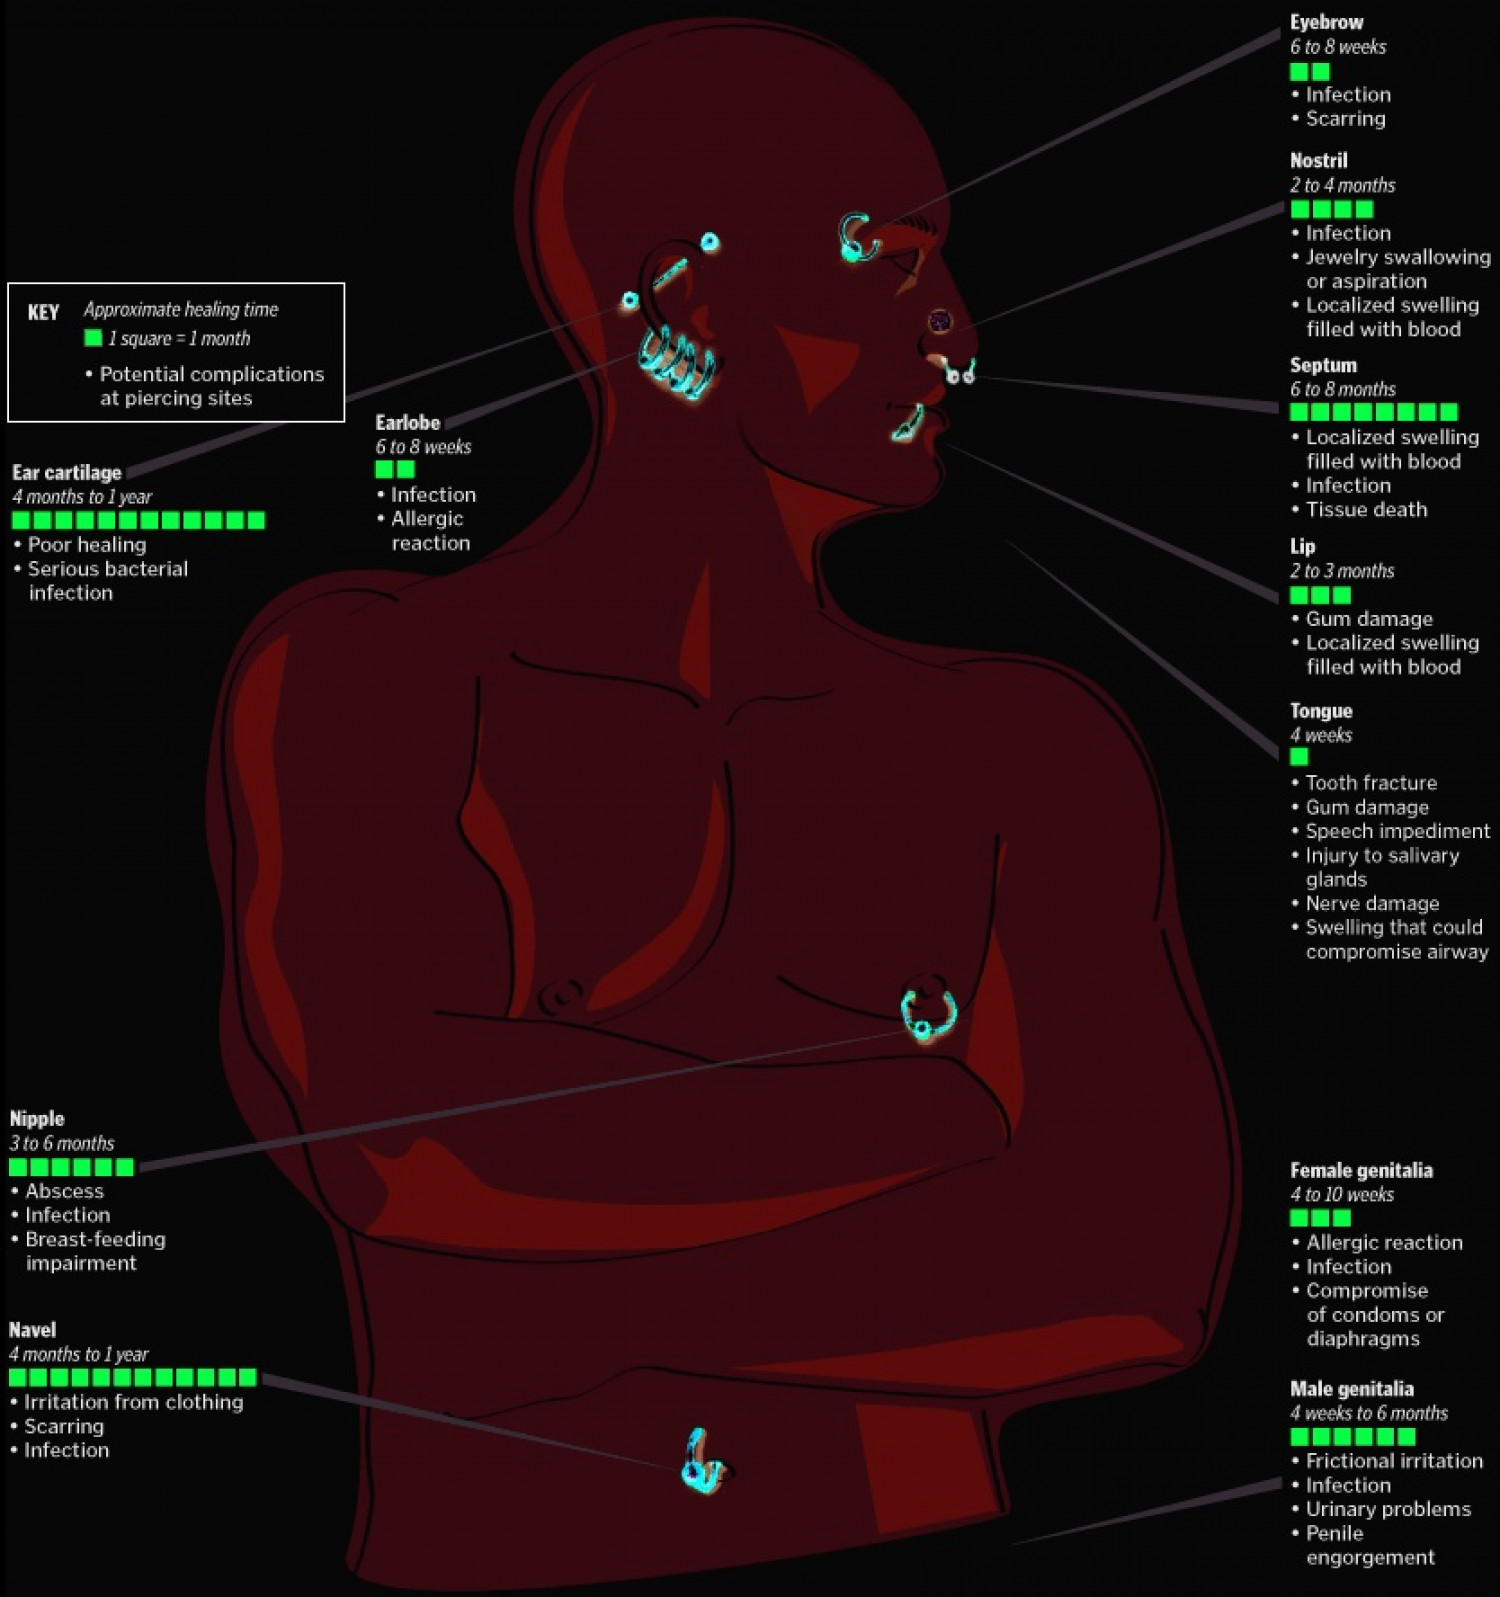 Infographic showing healing times for various types of body piercings